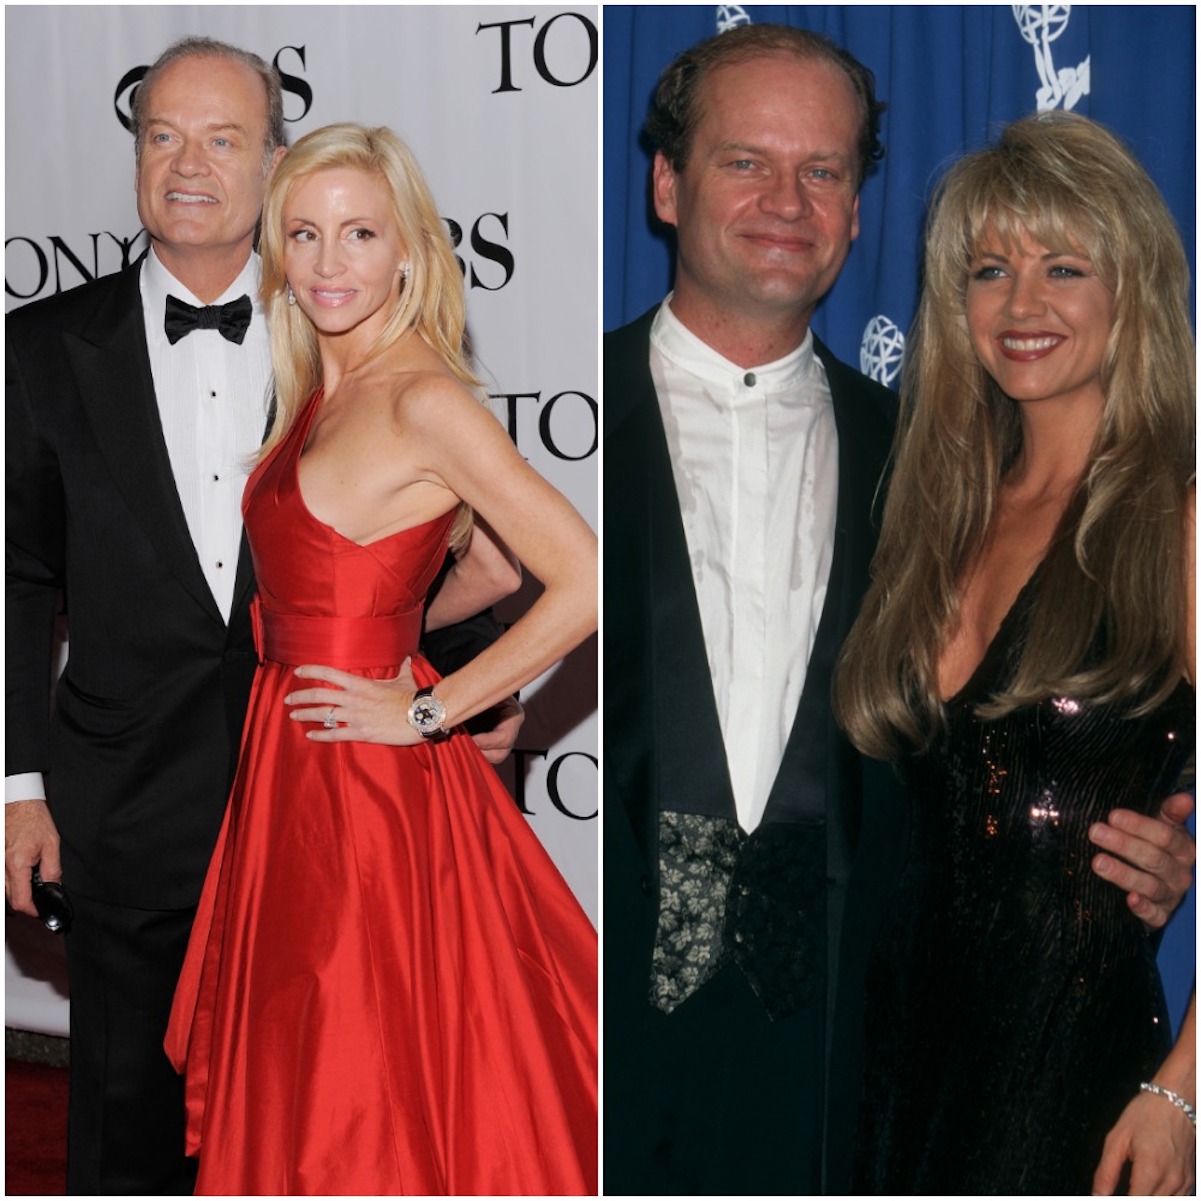 Kelsey Grammer and Camille Grammer; Kelsey Grammer and Tammi Baliszewski